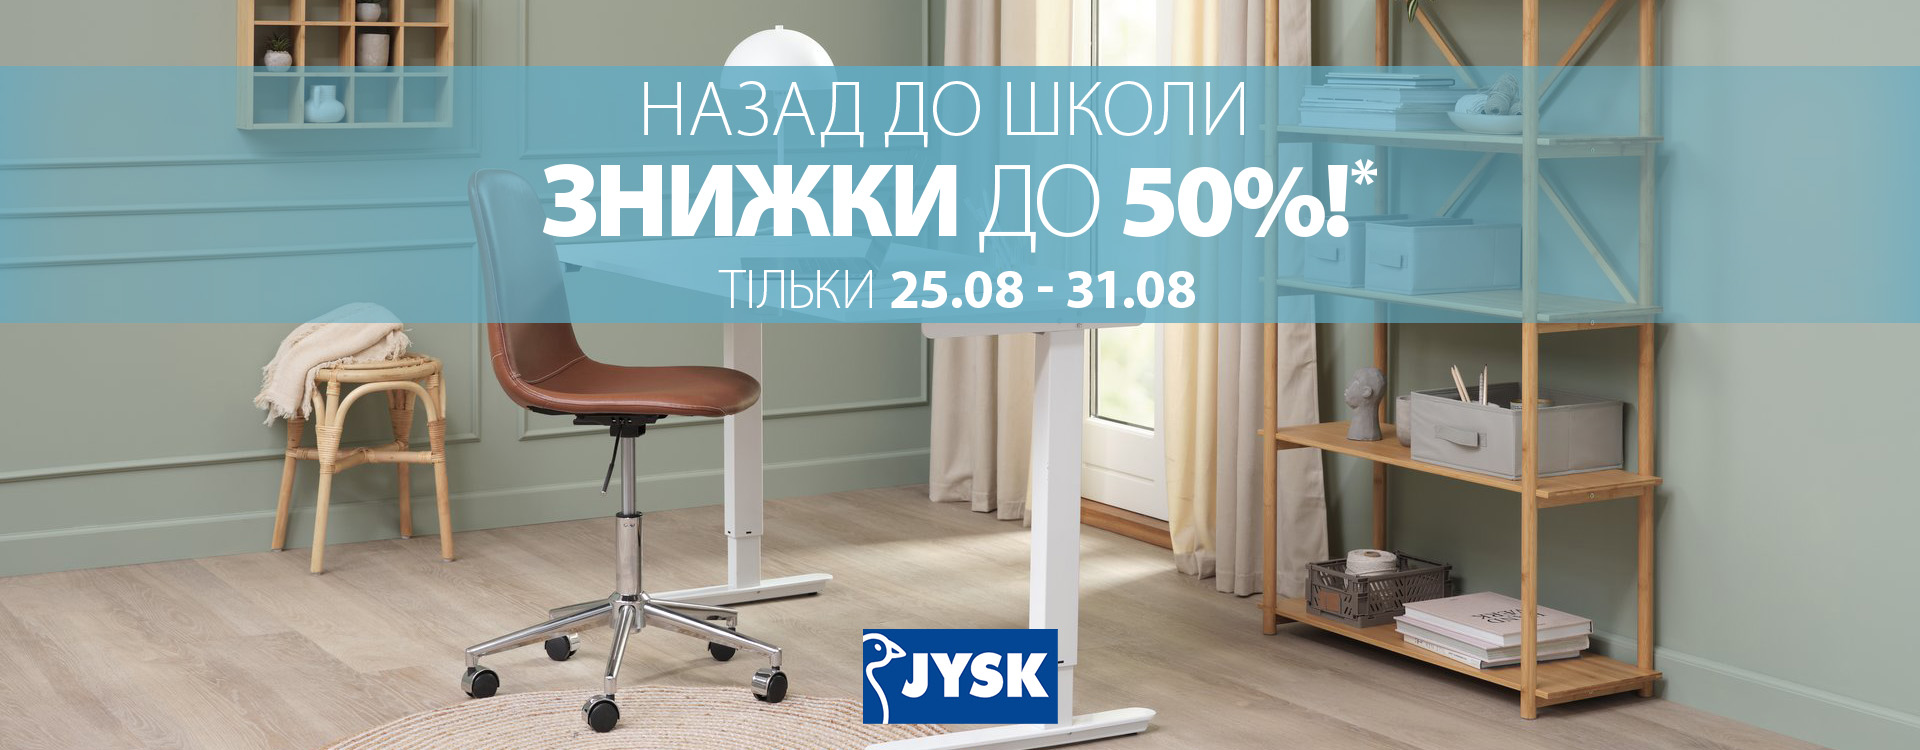 Discounts of up to 50% at JYSK